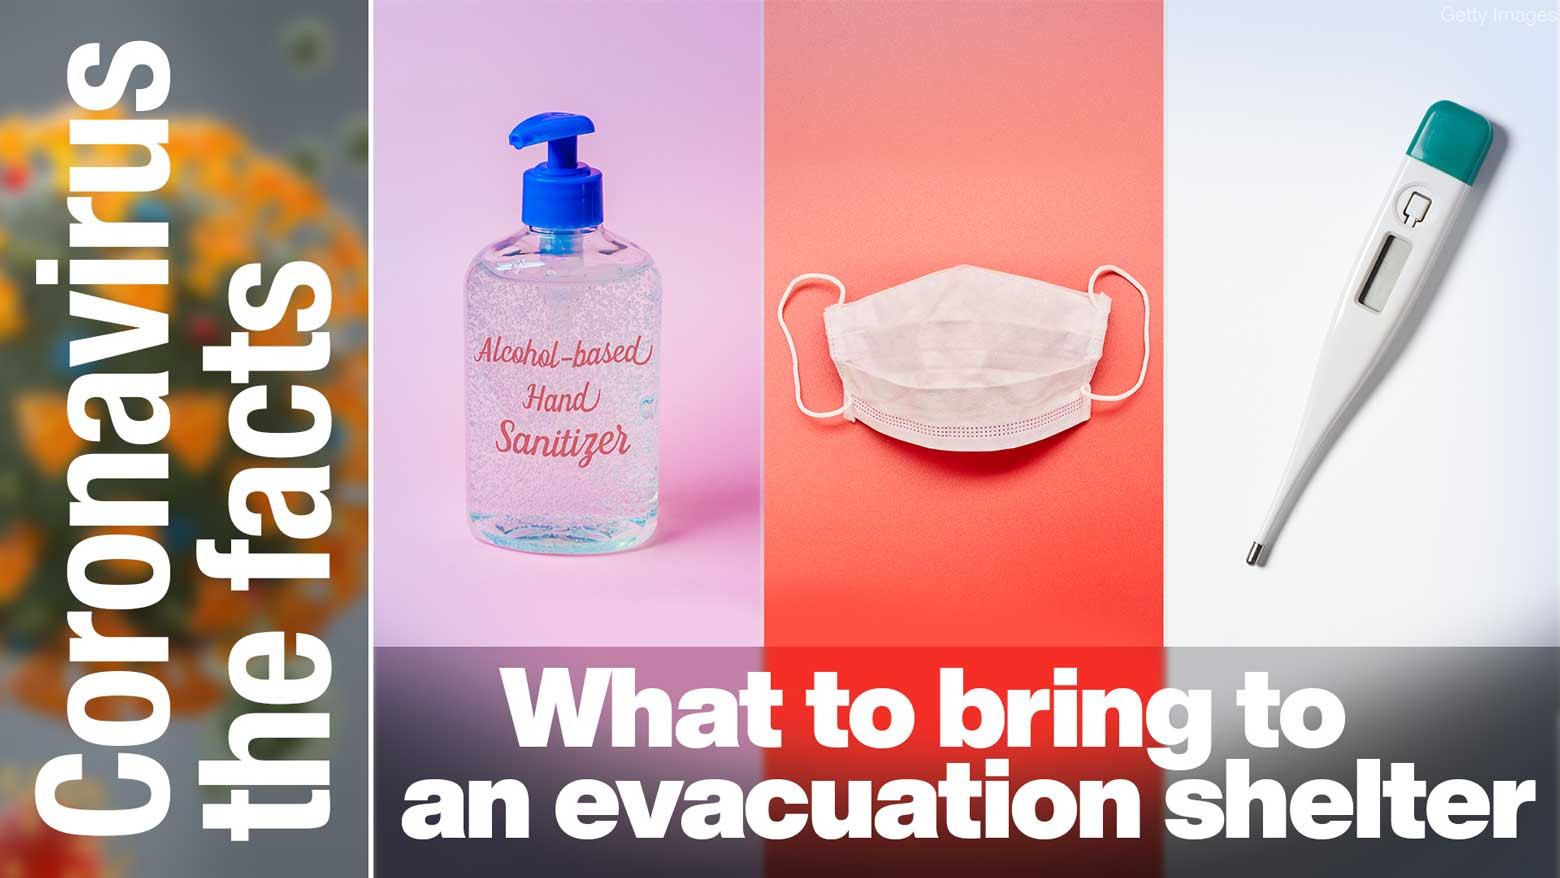 What should we bring to a shelter in the event of a natural disaster?